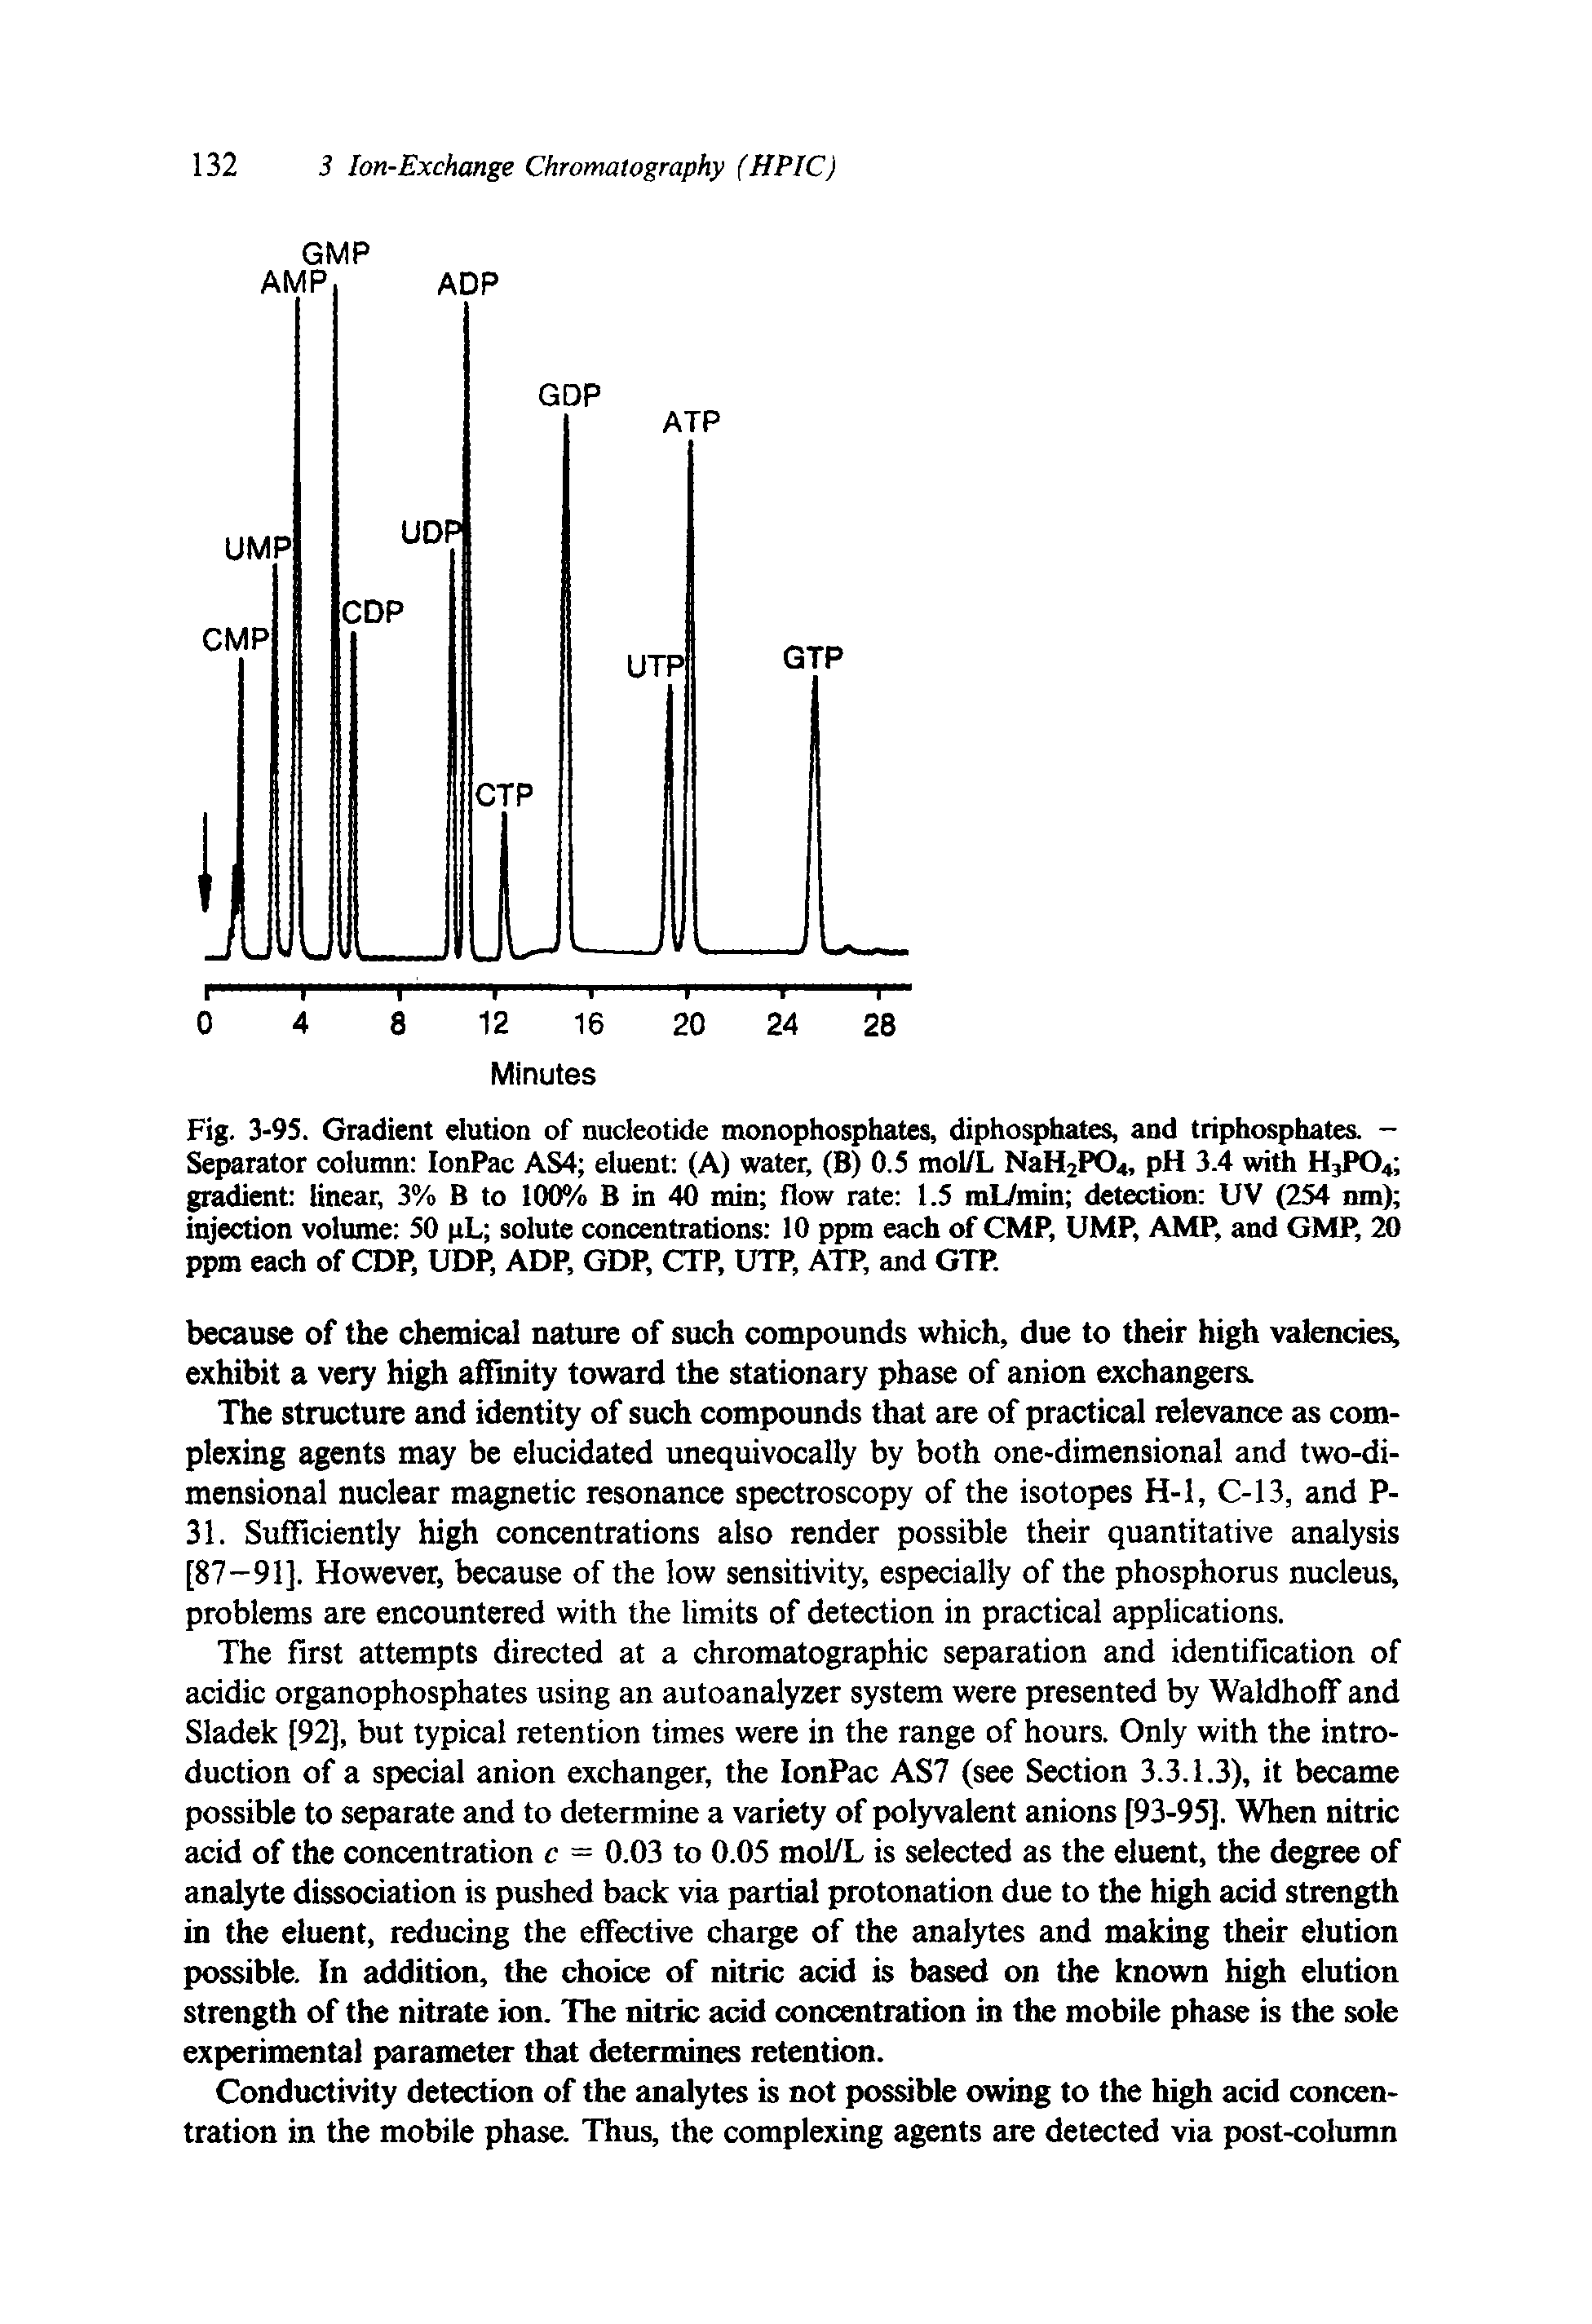 Fig. 3-95. Gradient elution of nucleotide monophosphates, diphosphates, and triphosphates. -Separator column IonPac AS4 eluent (A) water, (B) 0.5 mol/L NaH2PO. , pH 3.4 with HjP04 gradient linear, 3% B to 100% B in 40 min flow rate 1.5 mL/min detection UV (254 ran) injection volume 50 pL solute concentrations 10 ppm each of CMP, UMP, AMP, and GMP, 20 ppm each of CDP, UDP, ADP, GDP, CTP, UTP, ATP, and GTP.